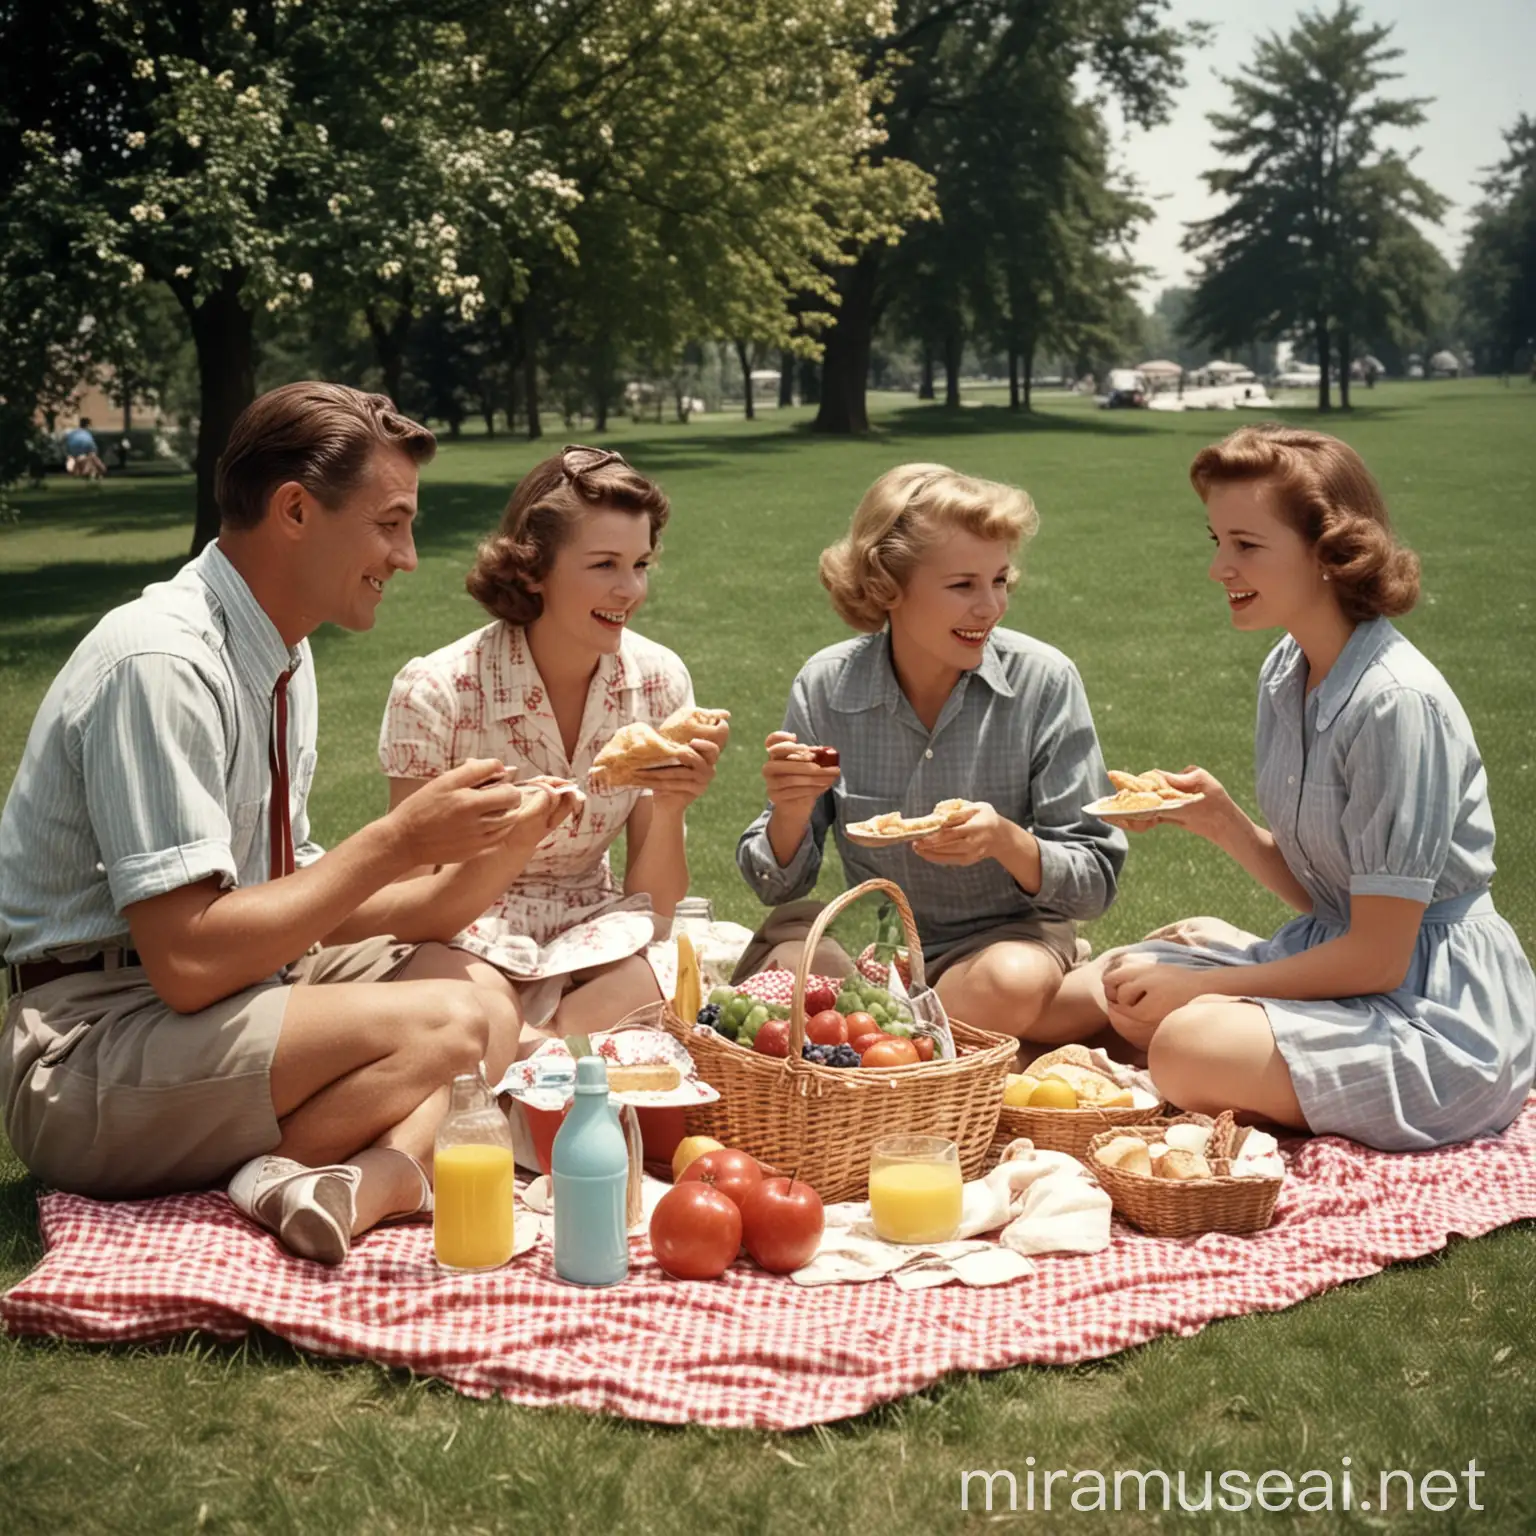 Baby Boomers (1946-1964): "A happy family having a picnic in the 1960s."